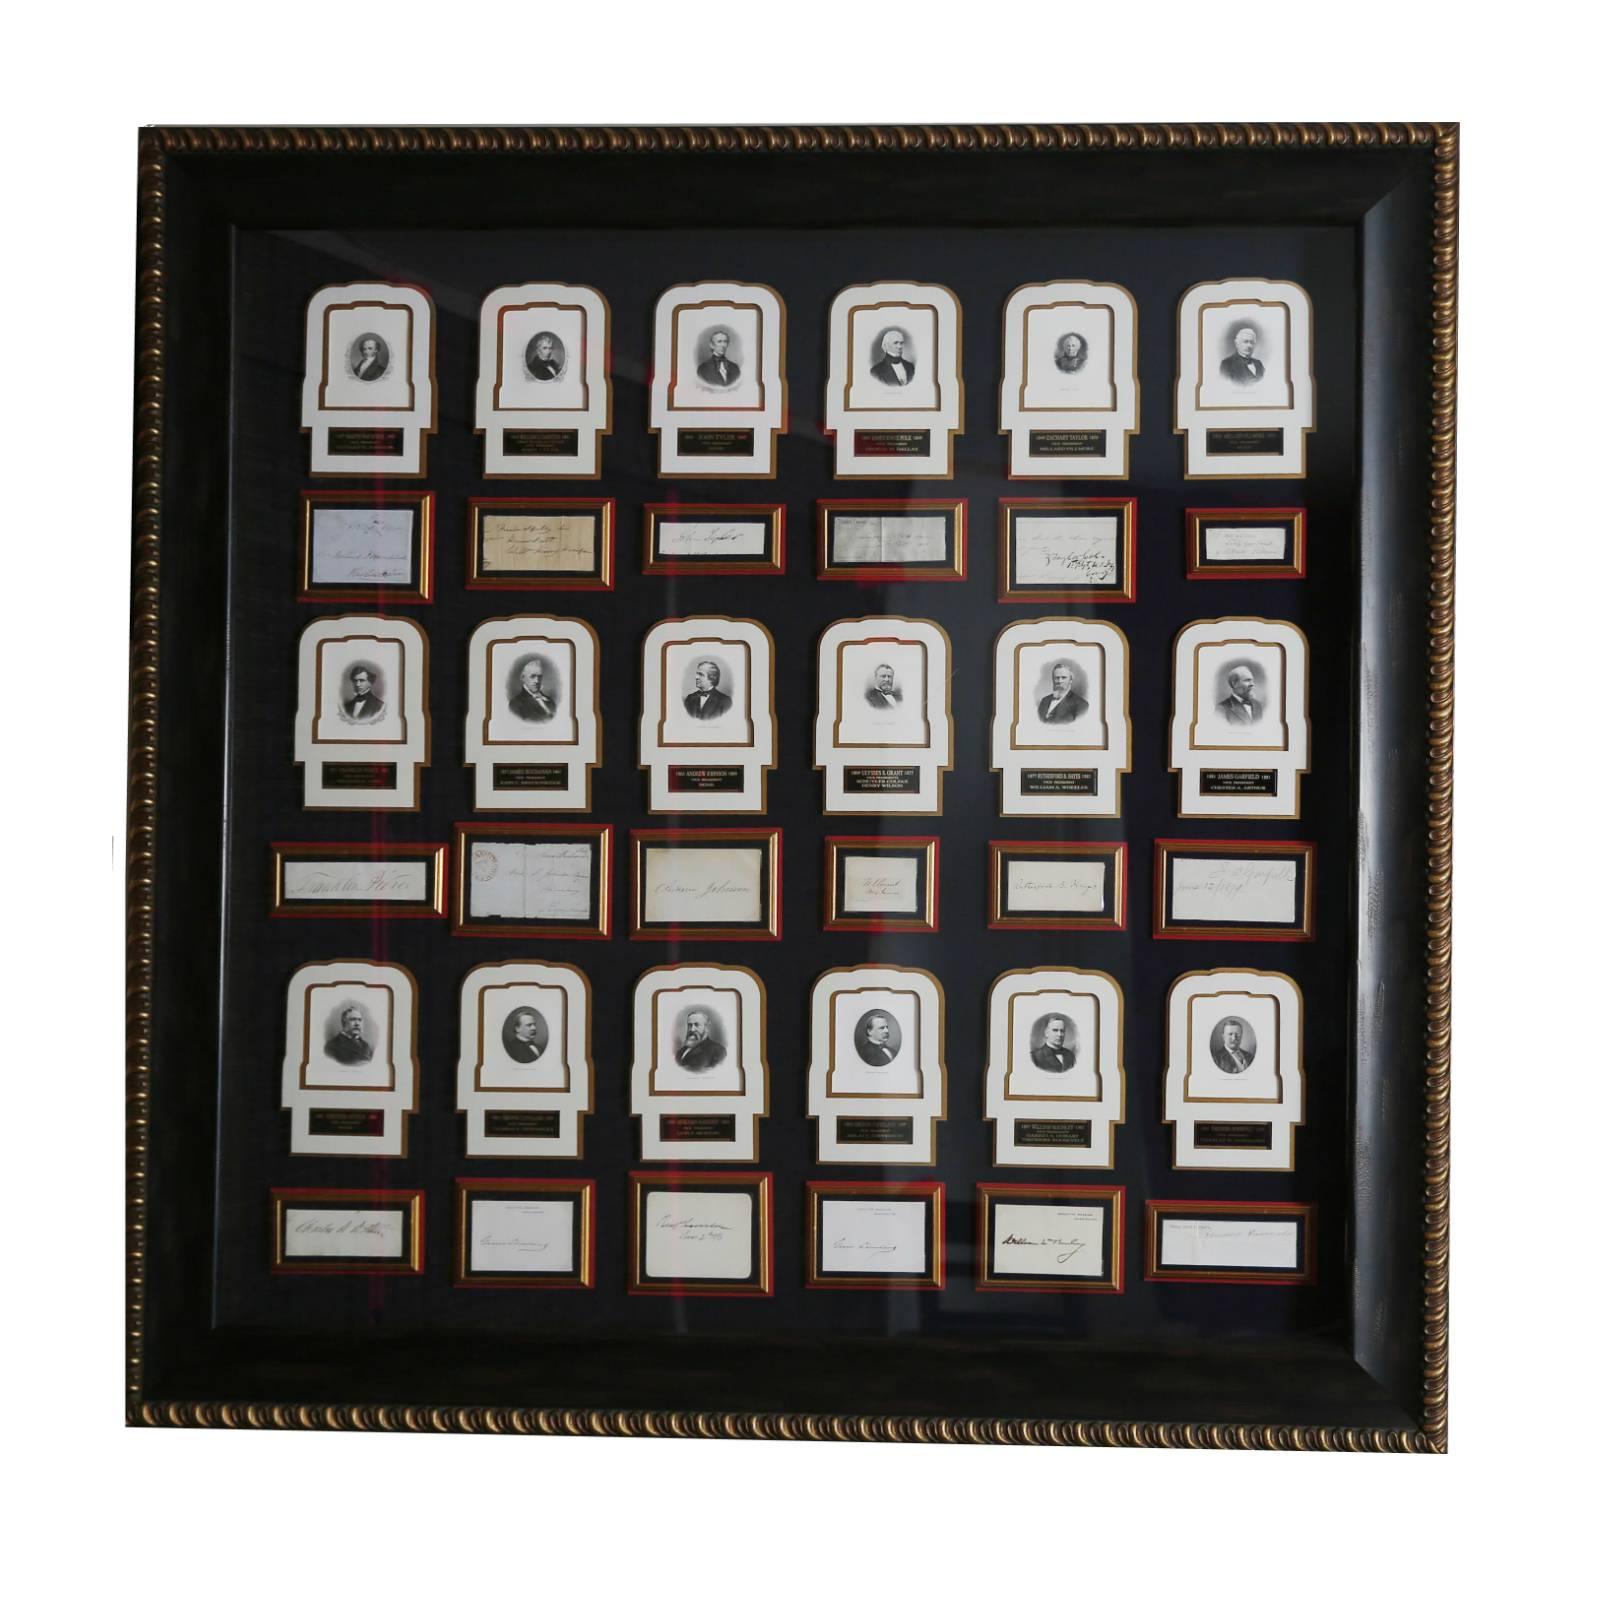 Complete collection of signatures of the 44 presidents of the United States of America, from George Washington to Barack Obama. The three hanging frames each contain a photograph and an authenticated sample of each Presidents signature. This series